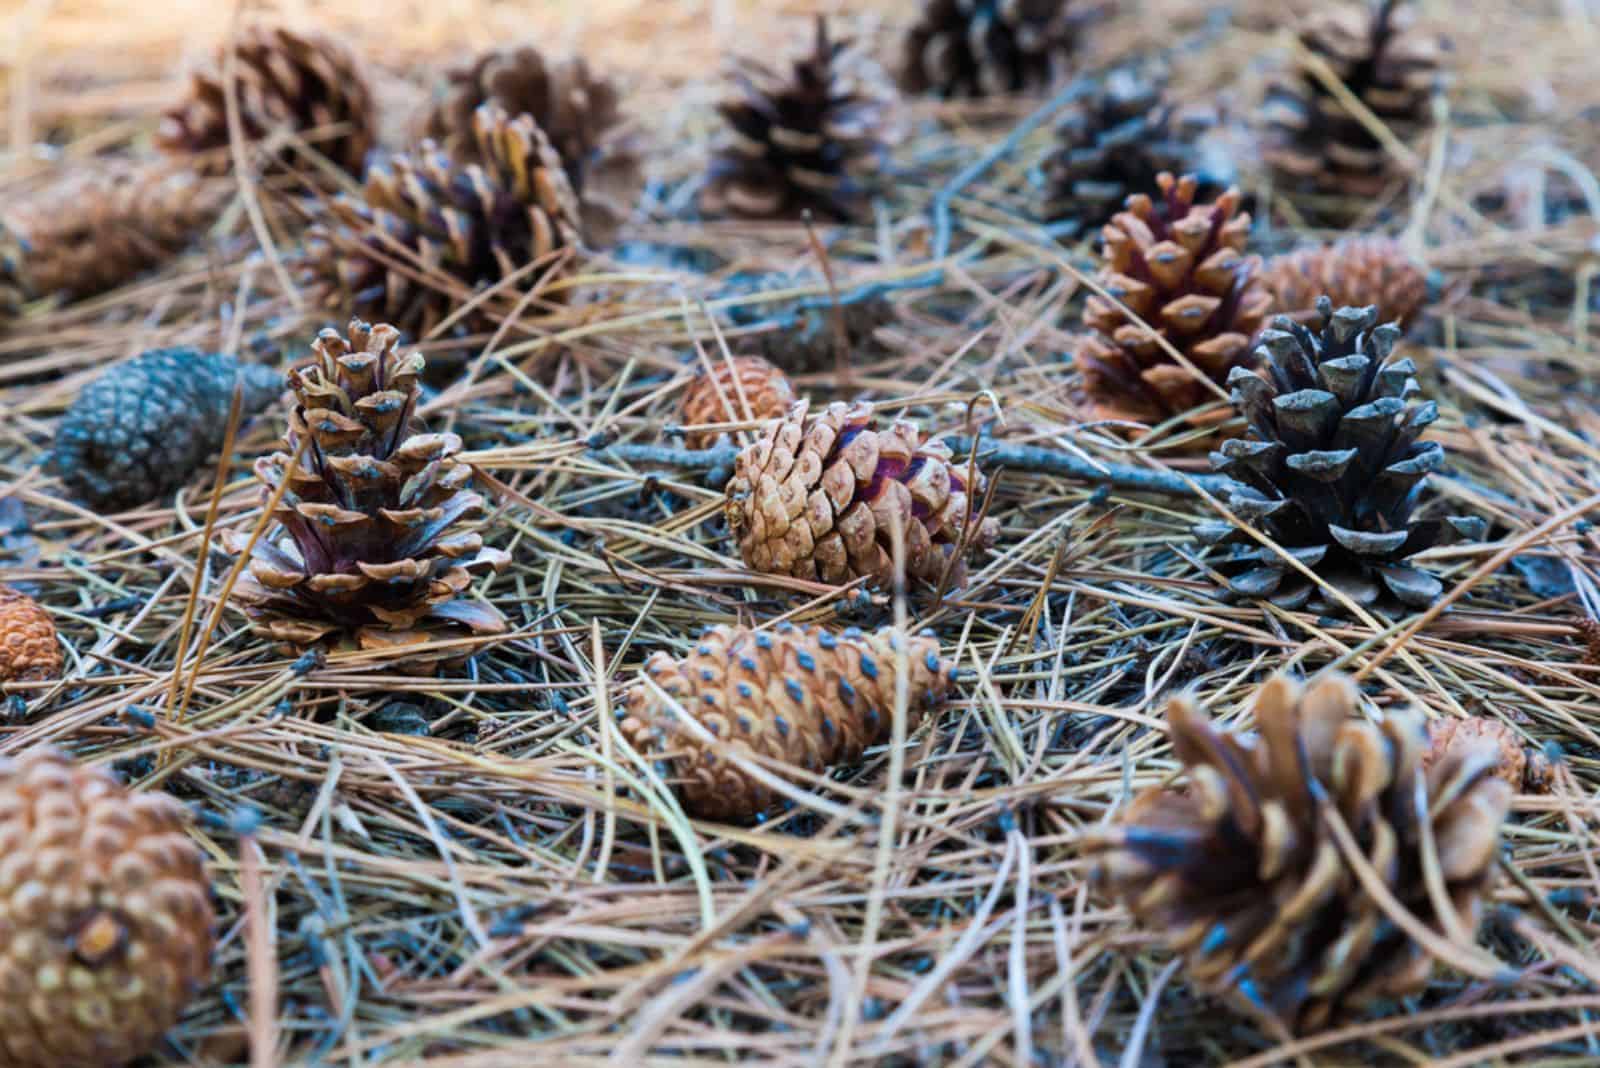 Cones lie on the ground with dried pine needles.